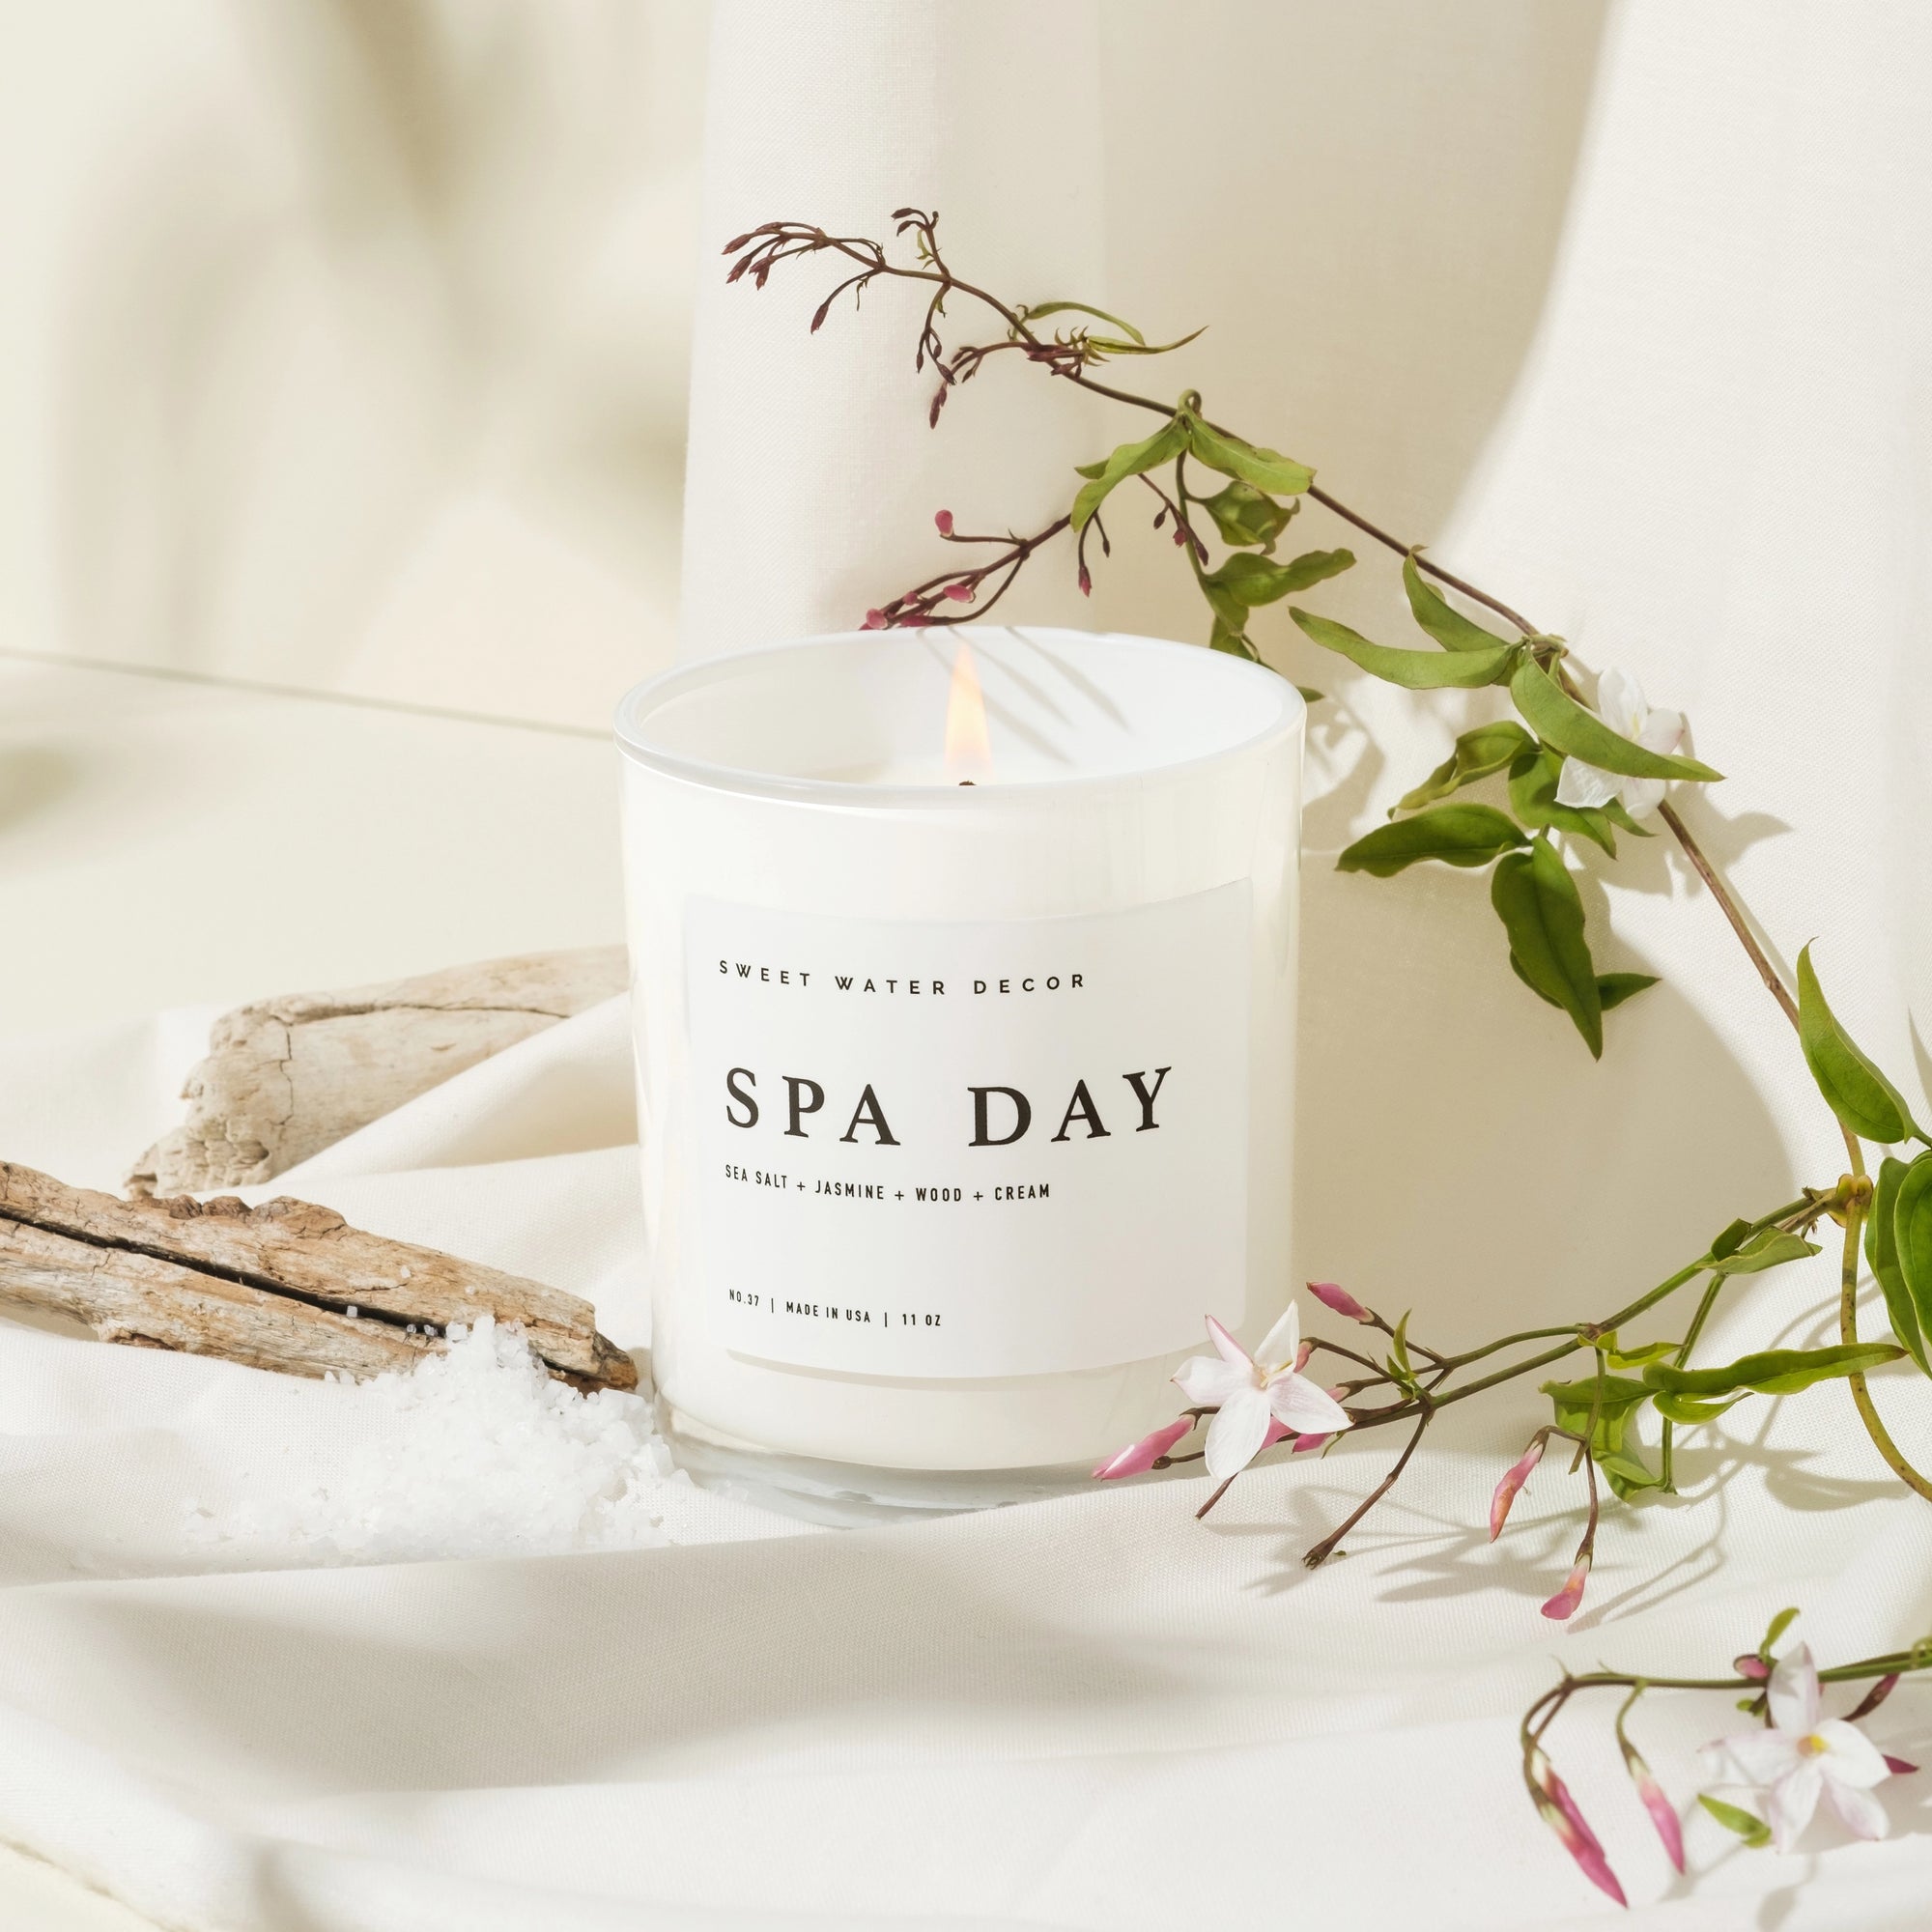 'Spa Day' soy candle on white background with flowers, wood and salt.